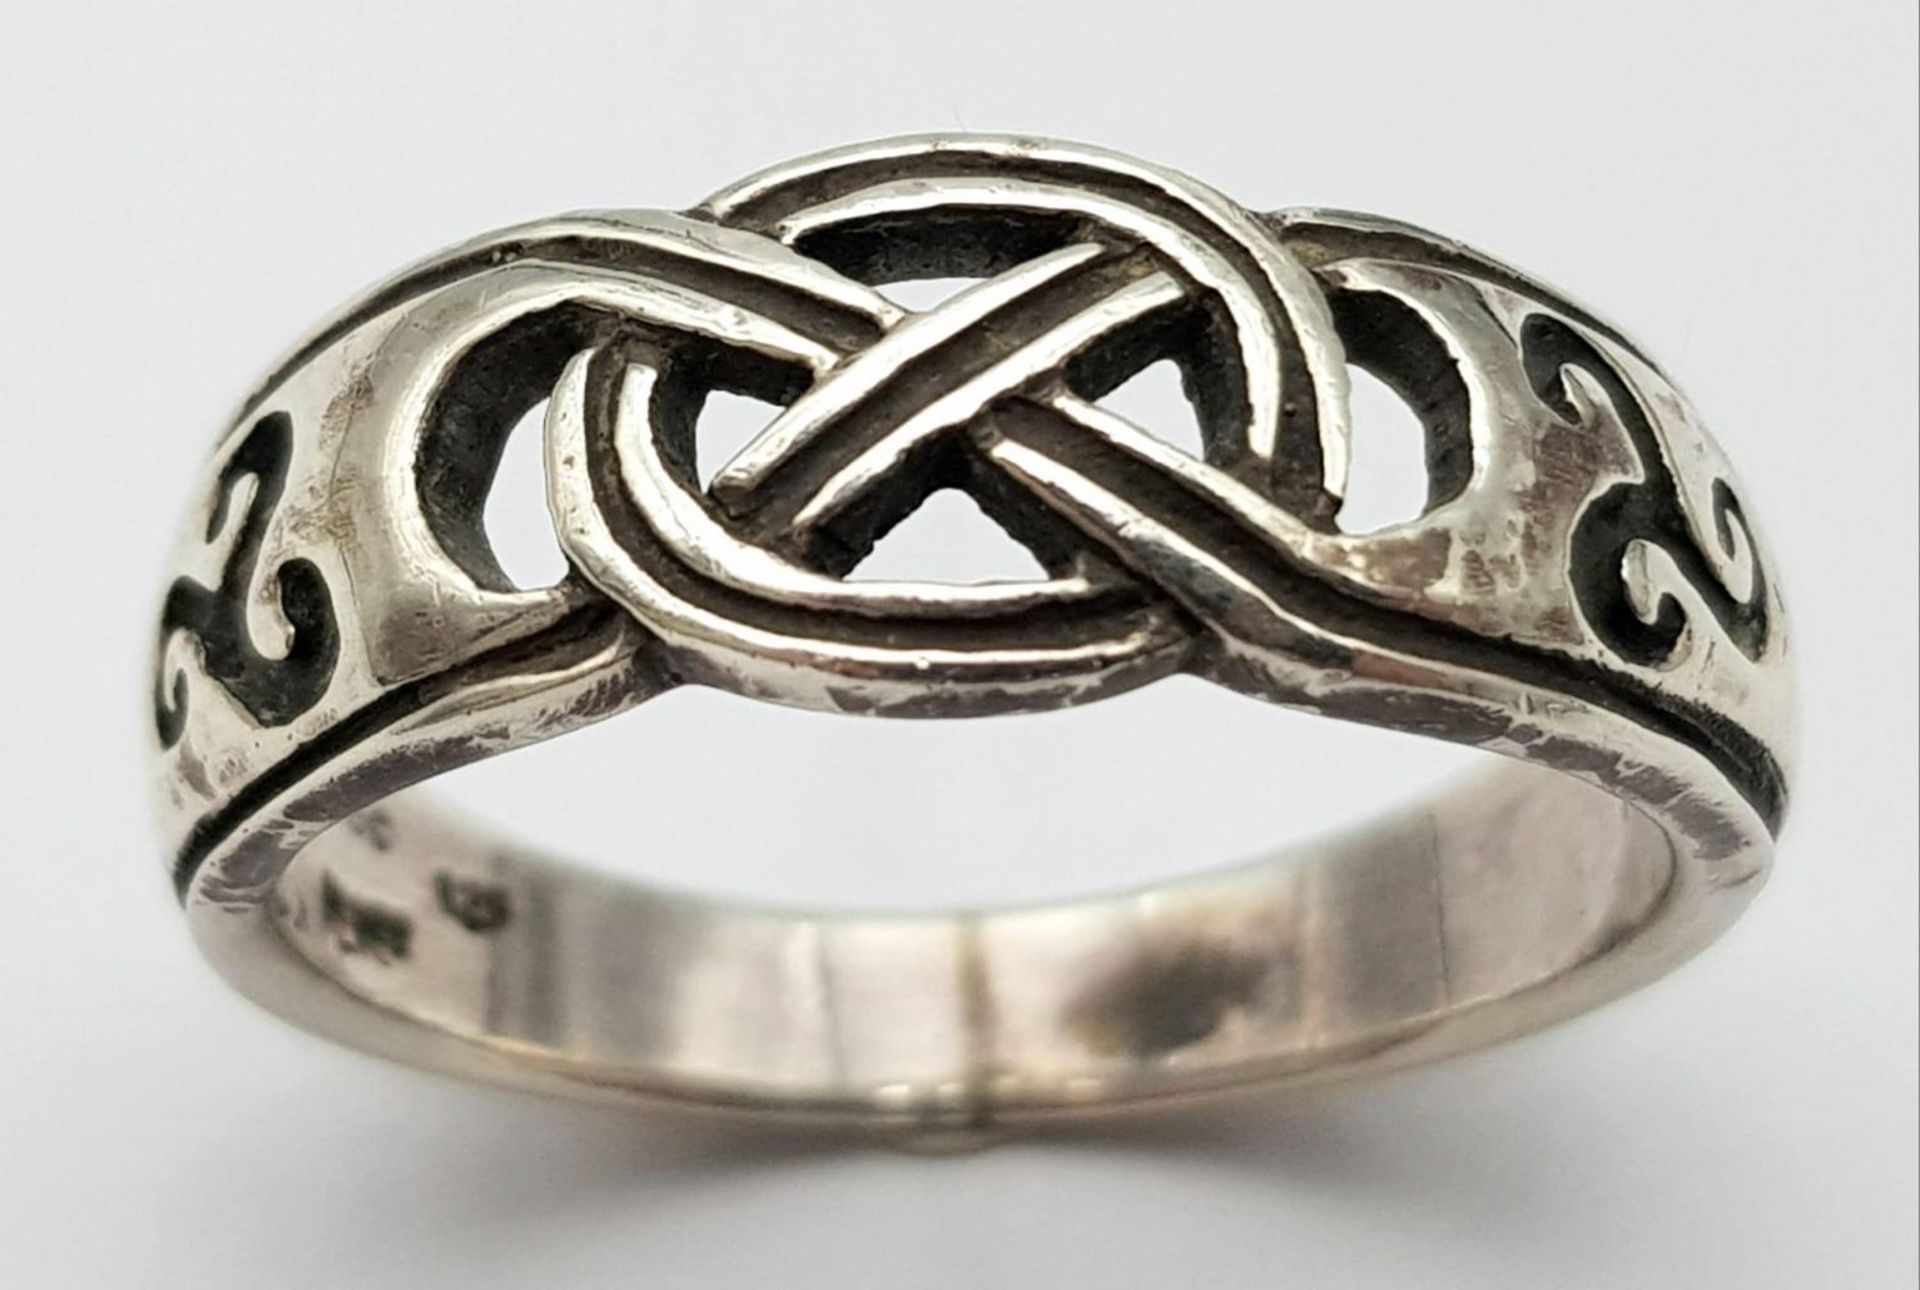 STERLING SILVER CELTIC DESIGN BAND RING, WEIGHT 5.6G SIZE V - Image 5 of 10